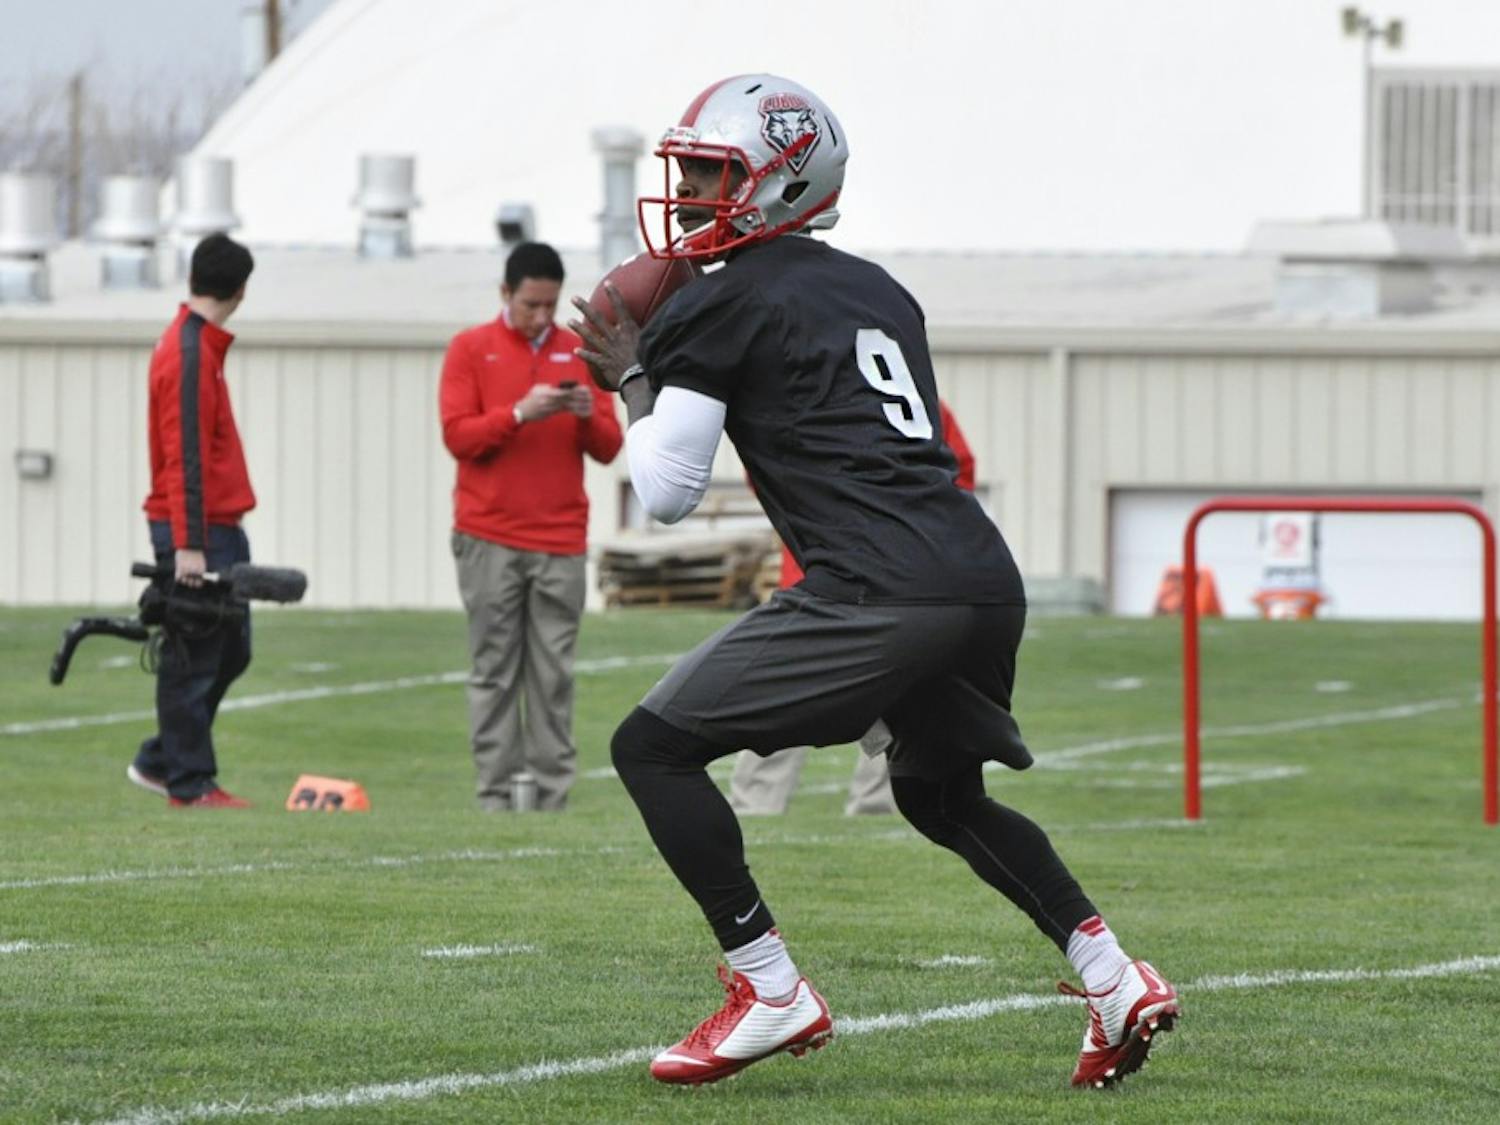 Redshirt Freshman Lamar Jordan looks to make a pass Wednesday morning during spring football practice at the Tow Diehm complex. Jordan said he looks forward to the competition for his spot in the team.